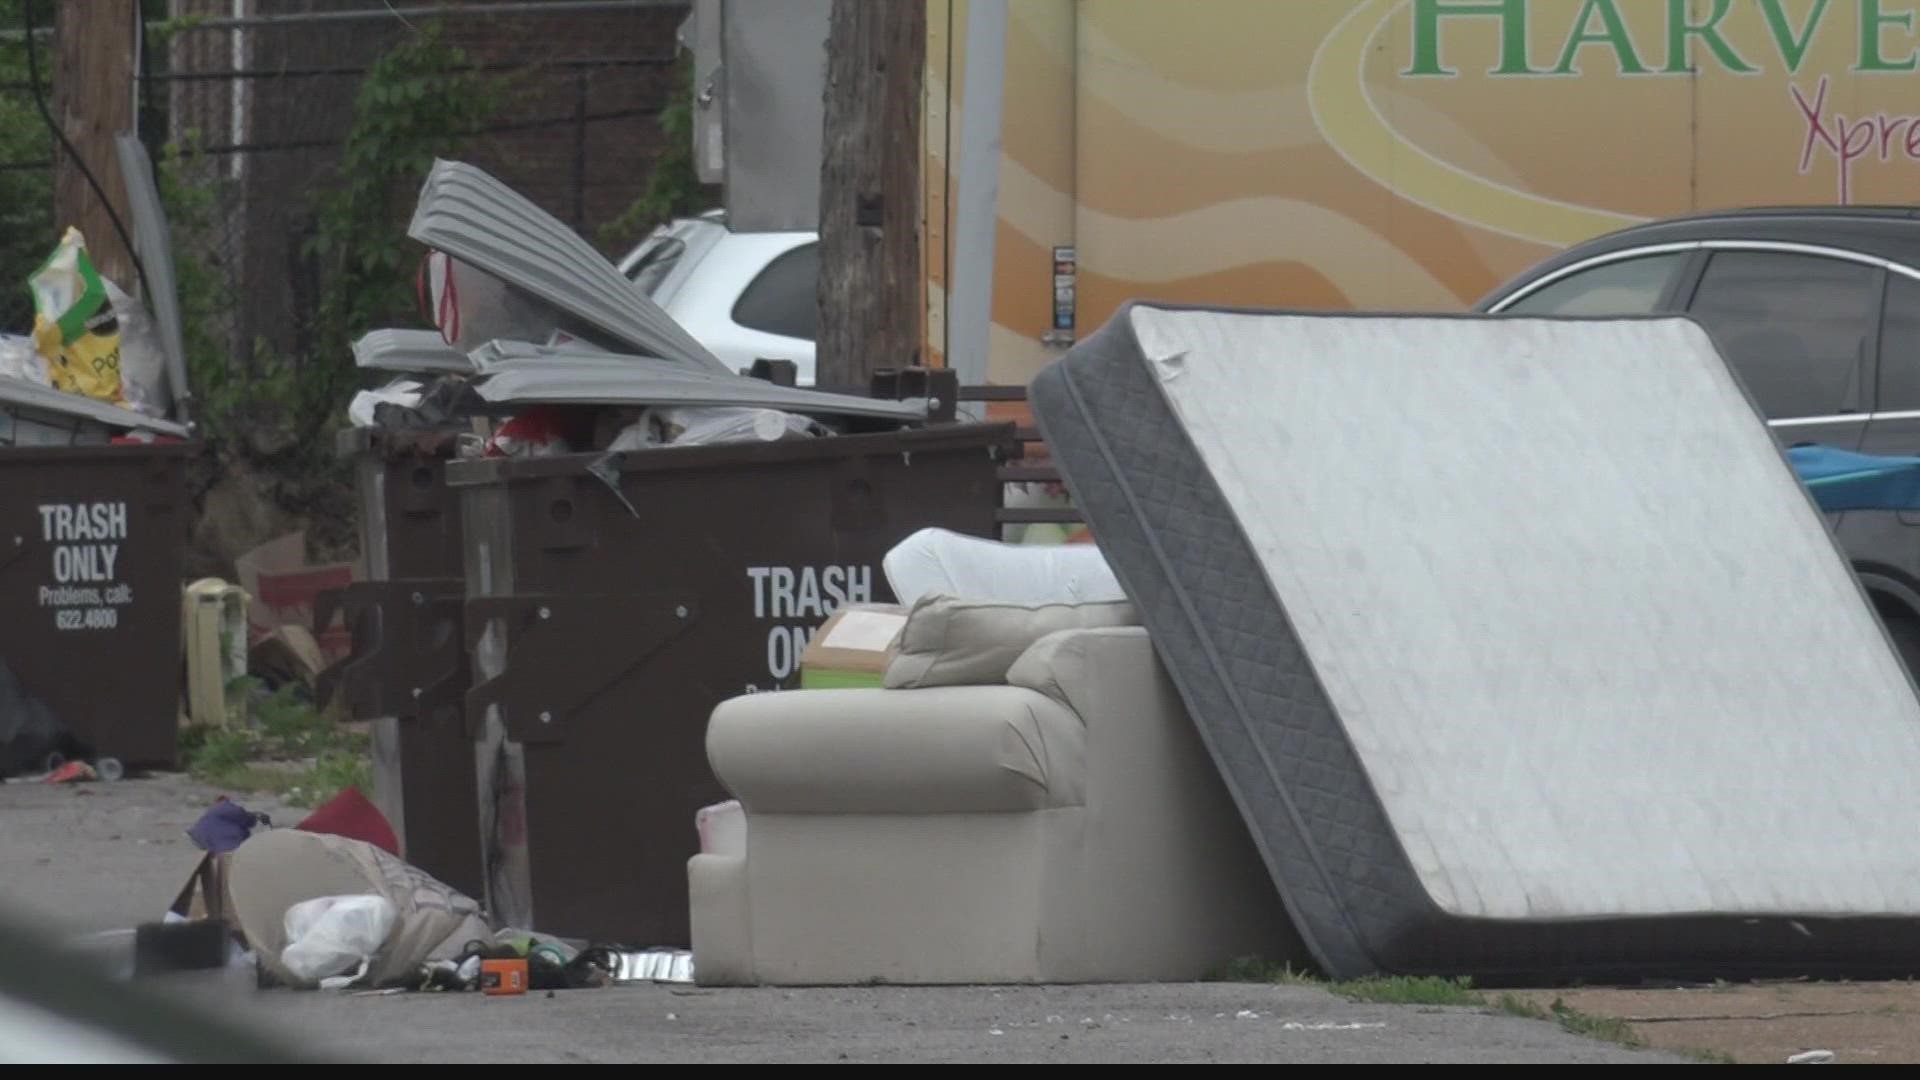 The recycling pickup will return by May 31, the City said.